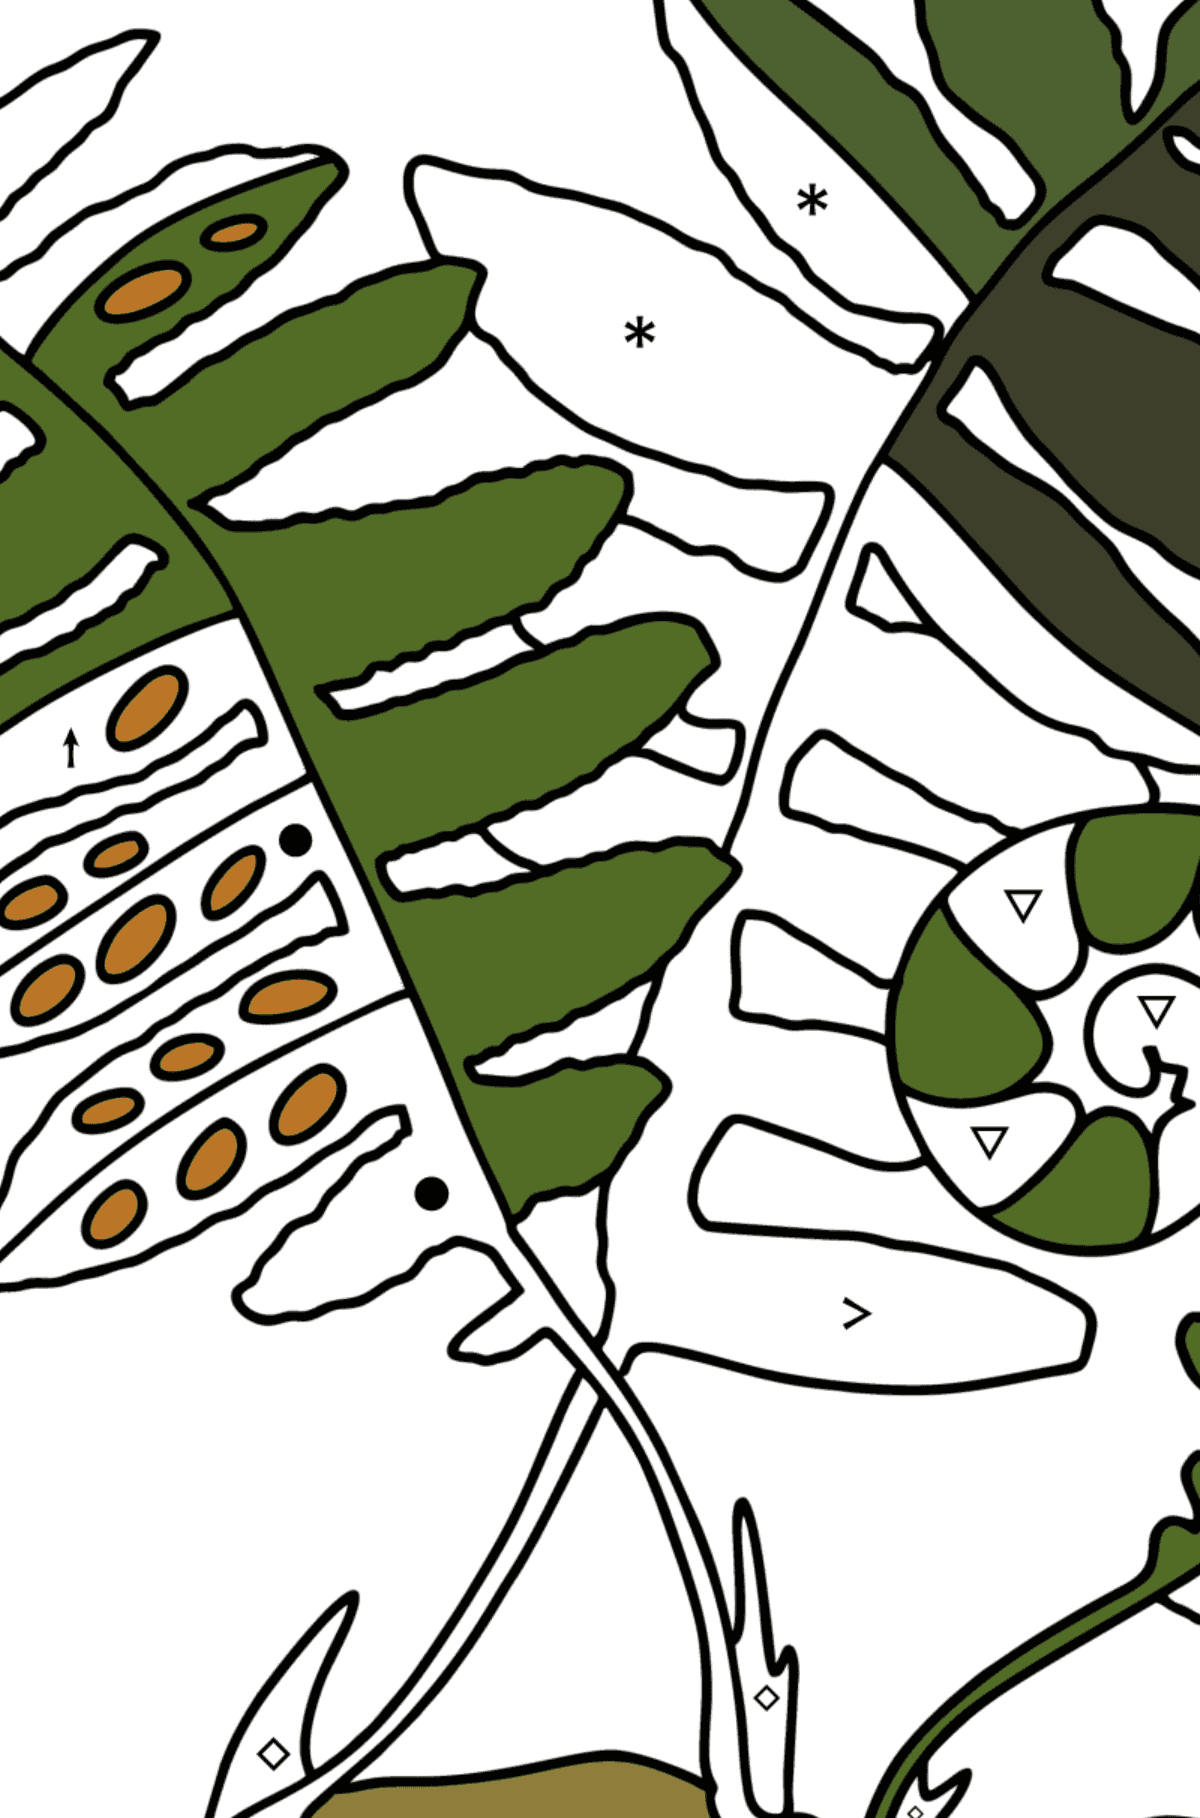 Fern Leaves coloring page - Coloring by Symbols for Kids